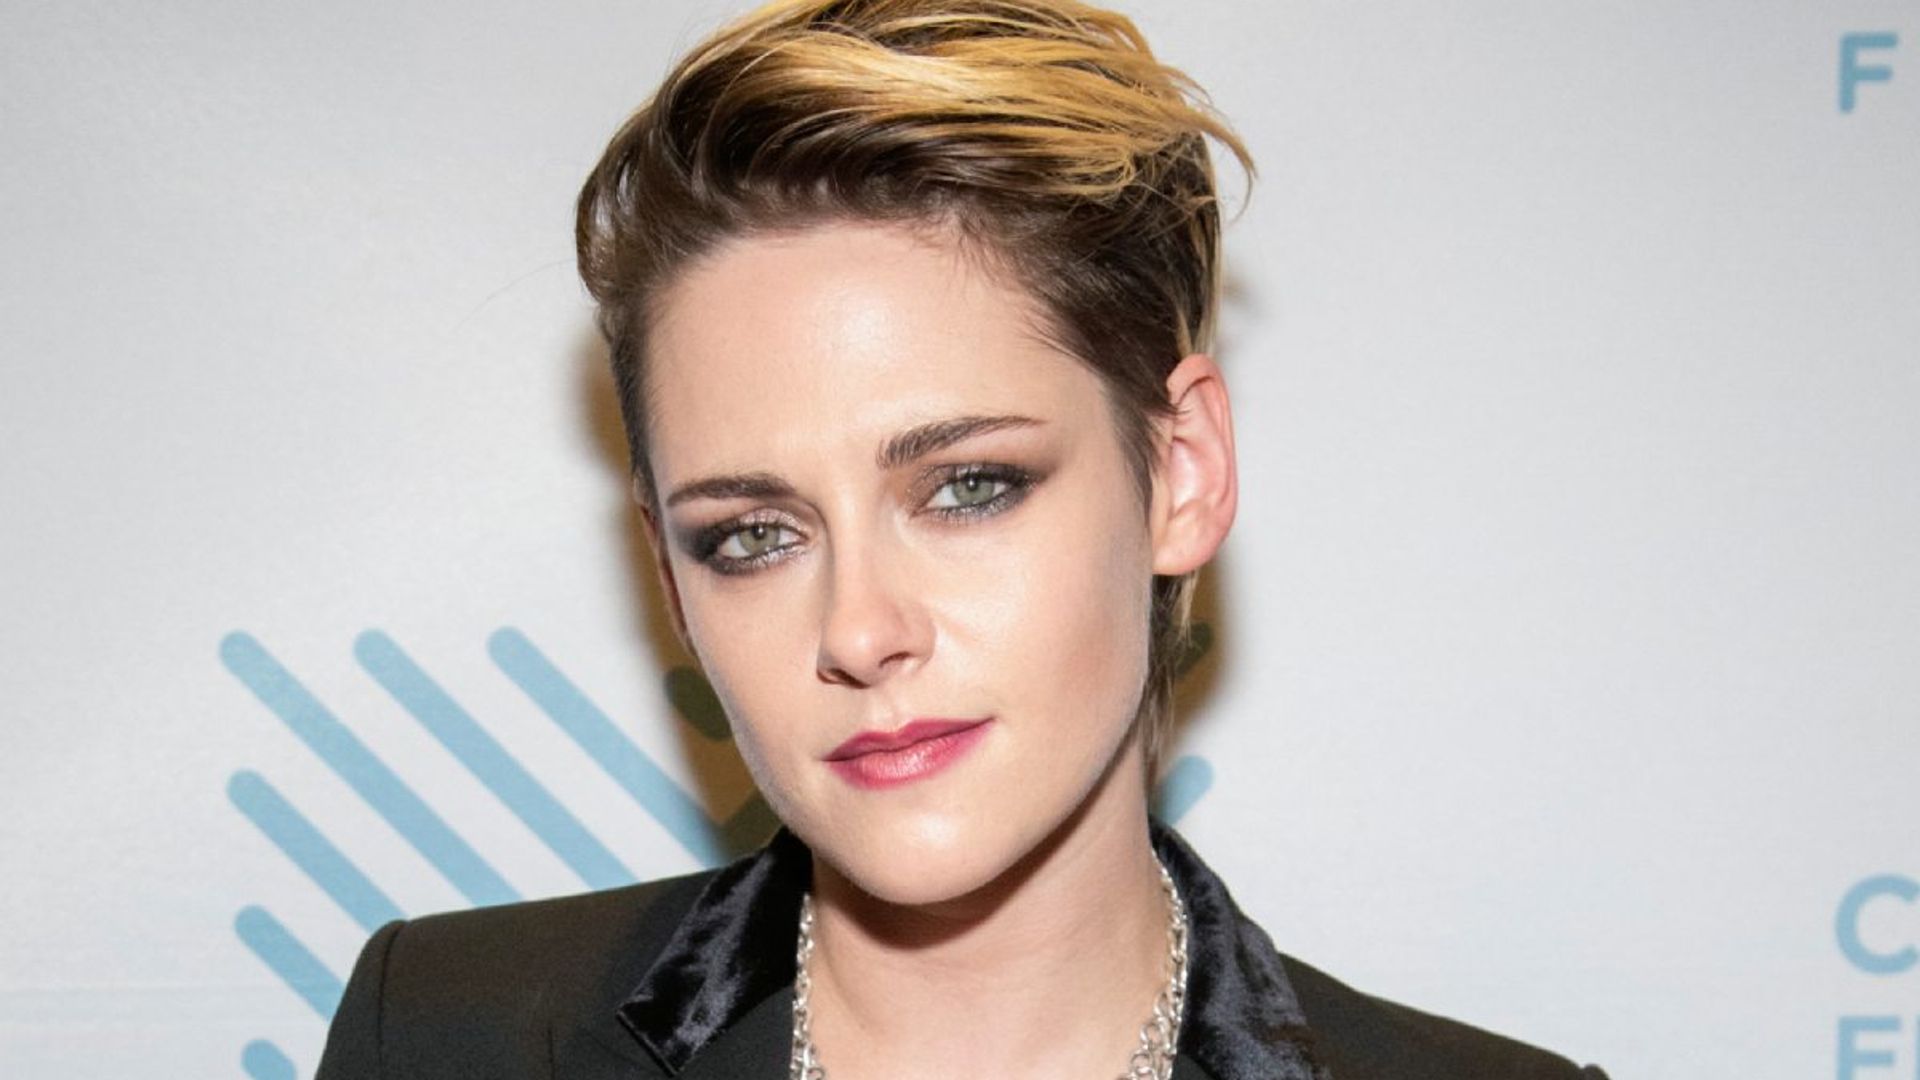 Kristen Stewart joins fiancee and Ashley Benson for fun day out